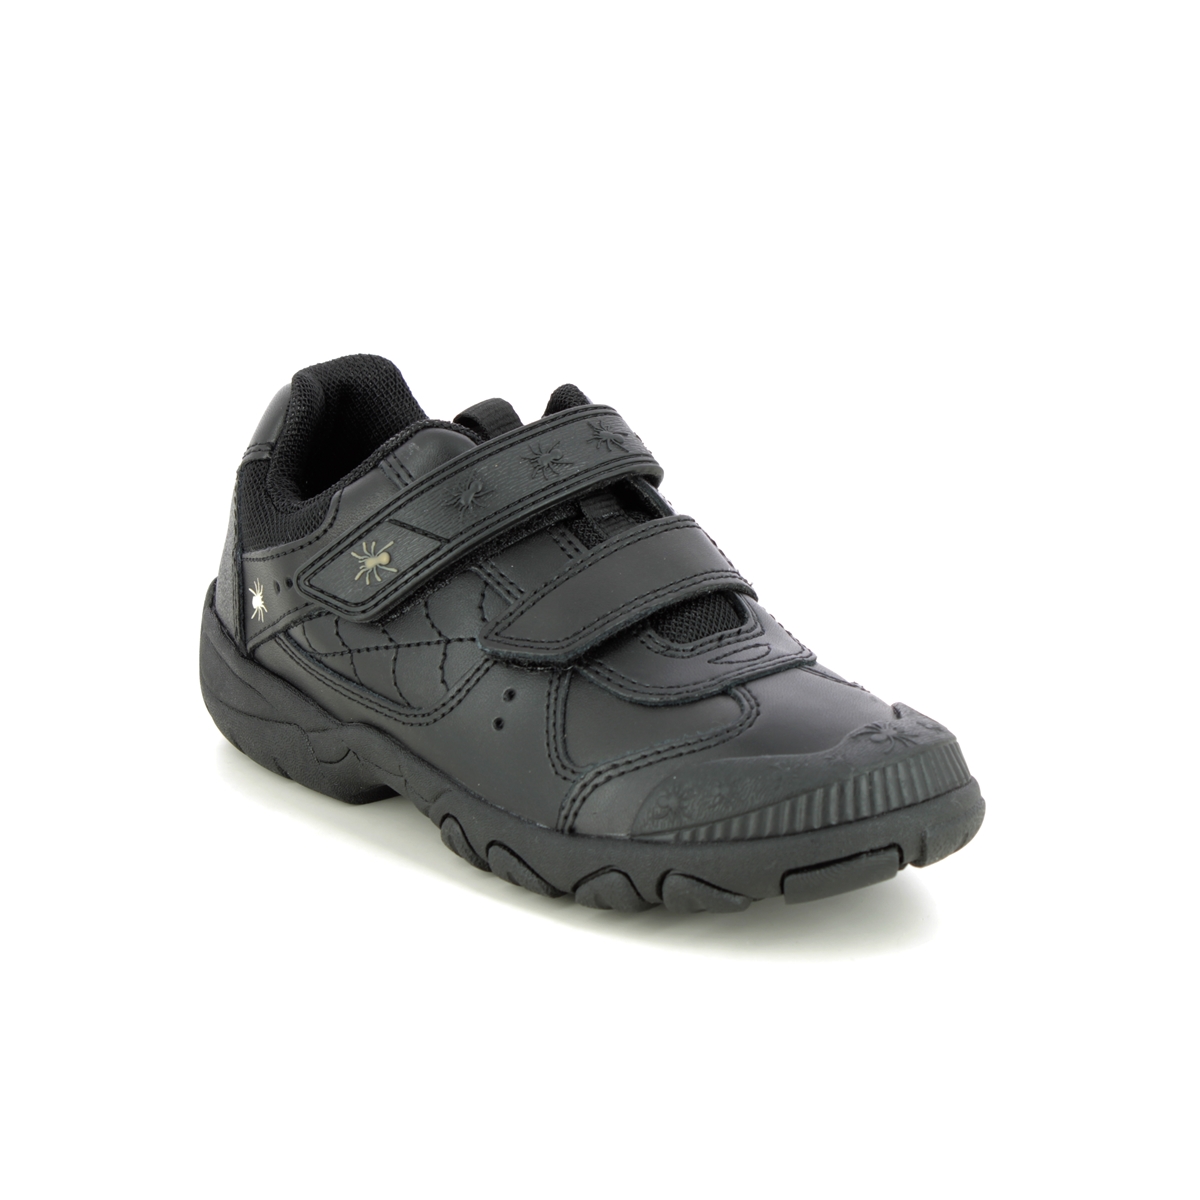 Start Rite - Tarantula In Black Leather 2272-76F In Size 1.5 In Plain Black Leather For School Boys Shoes  In Black Leather For kids